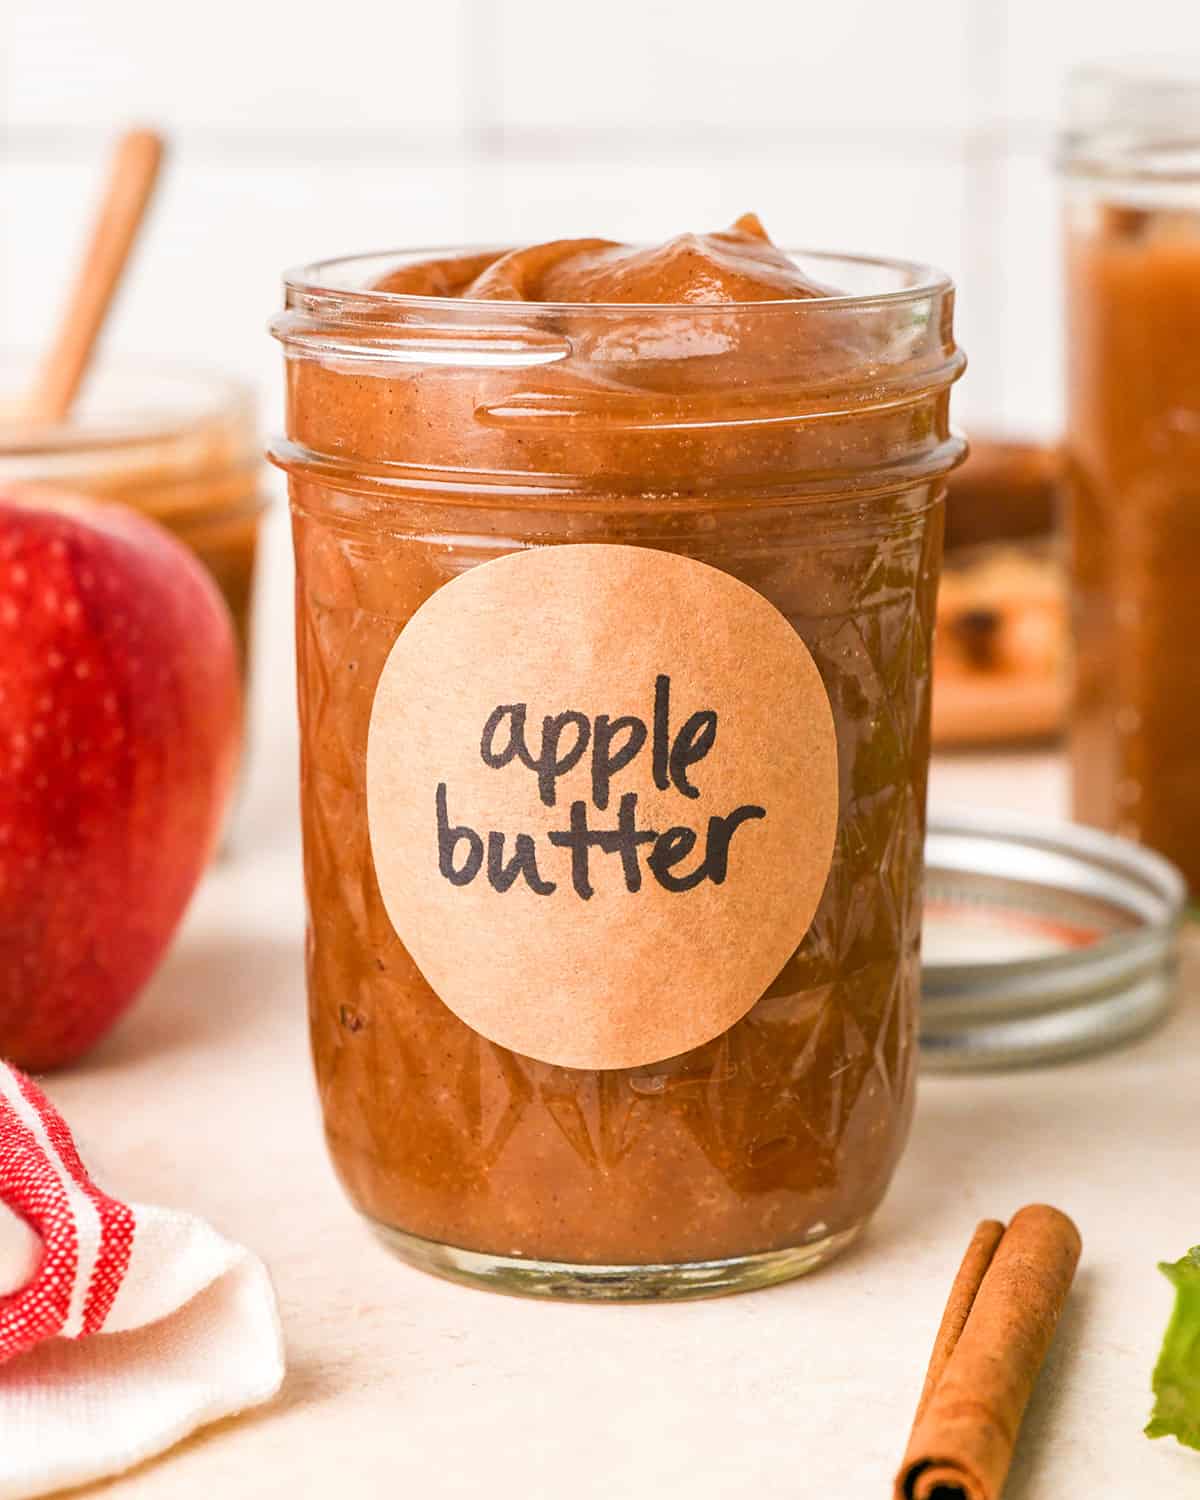 Apple Butter in a glass jar with a label